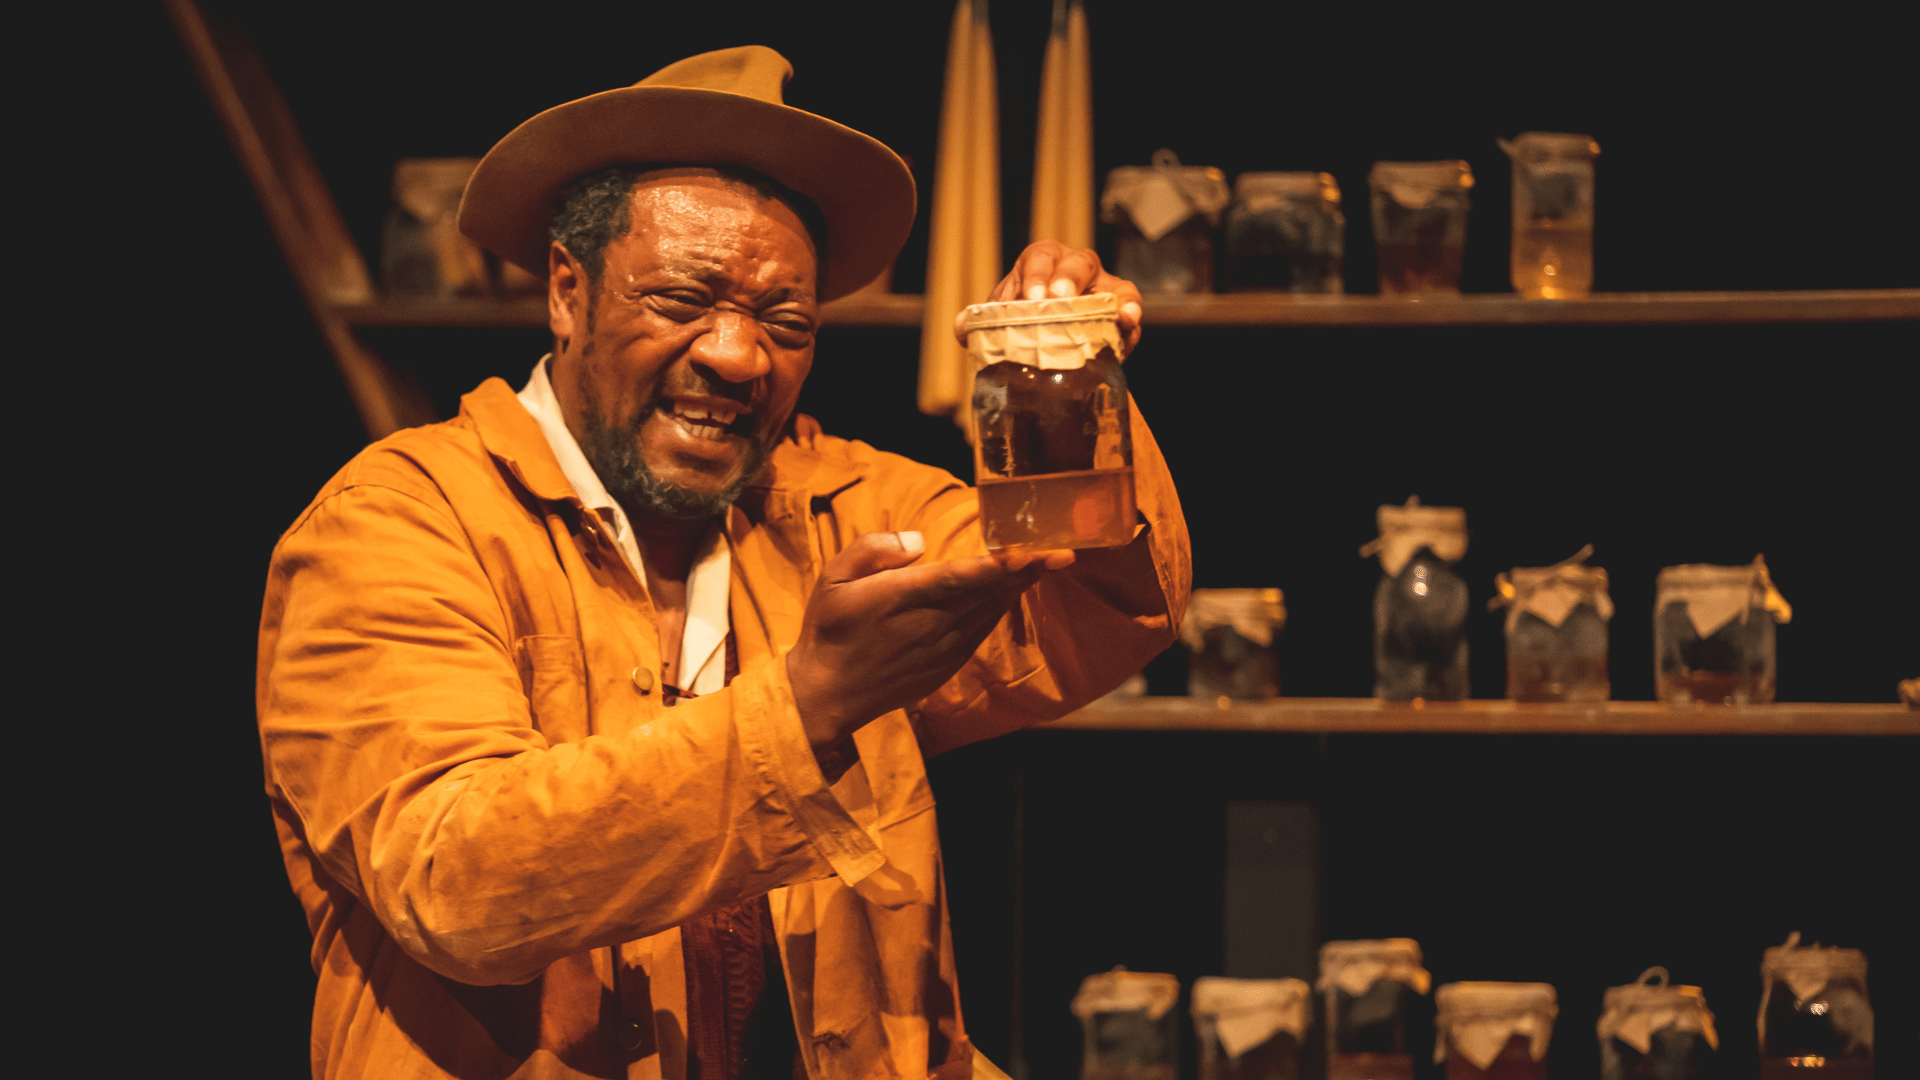 The Honey Man Production Photo: Honey Man (Everal Walsh) holds up a jar of honey while smiling